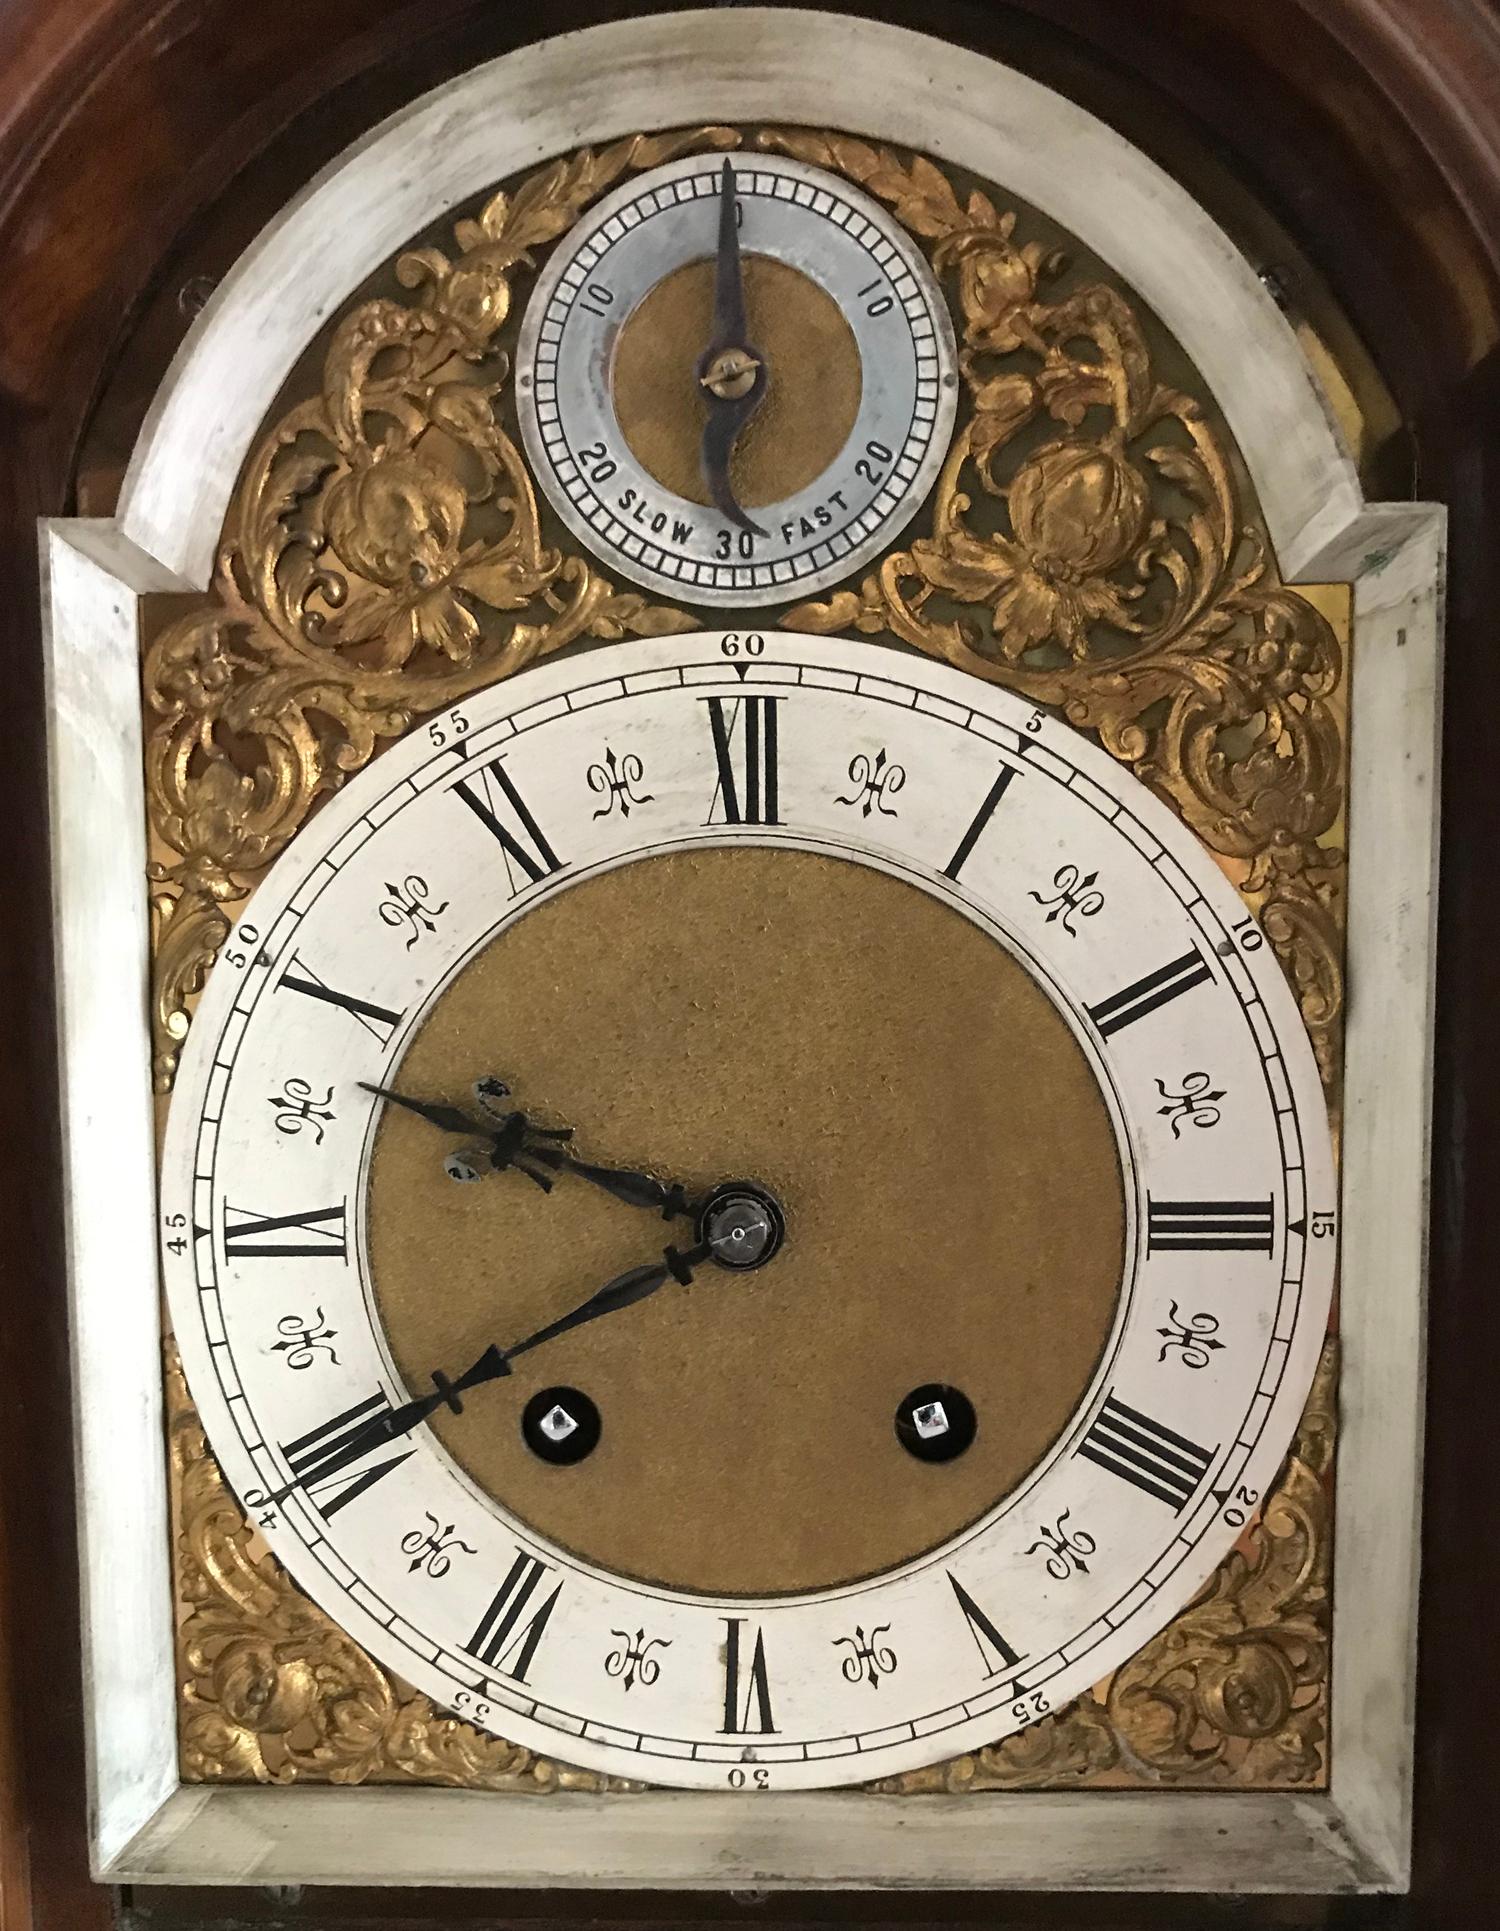 A fine quality quarter chiming burr walnut Lenzkirch bracket clock, late 19th century.

Lenzkirch clocks are considered to be the finest of the Victorian German makers and they are always of excellent quality.

The walnut veneered case has blue